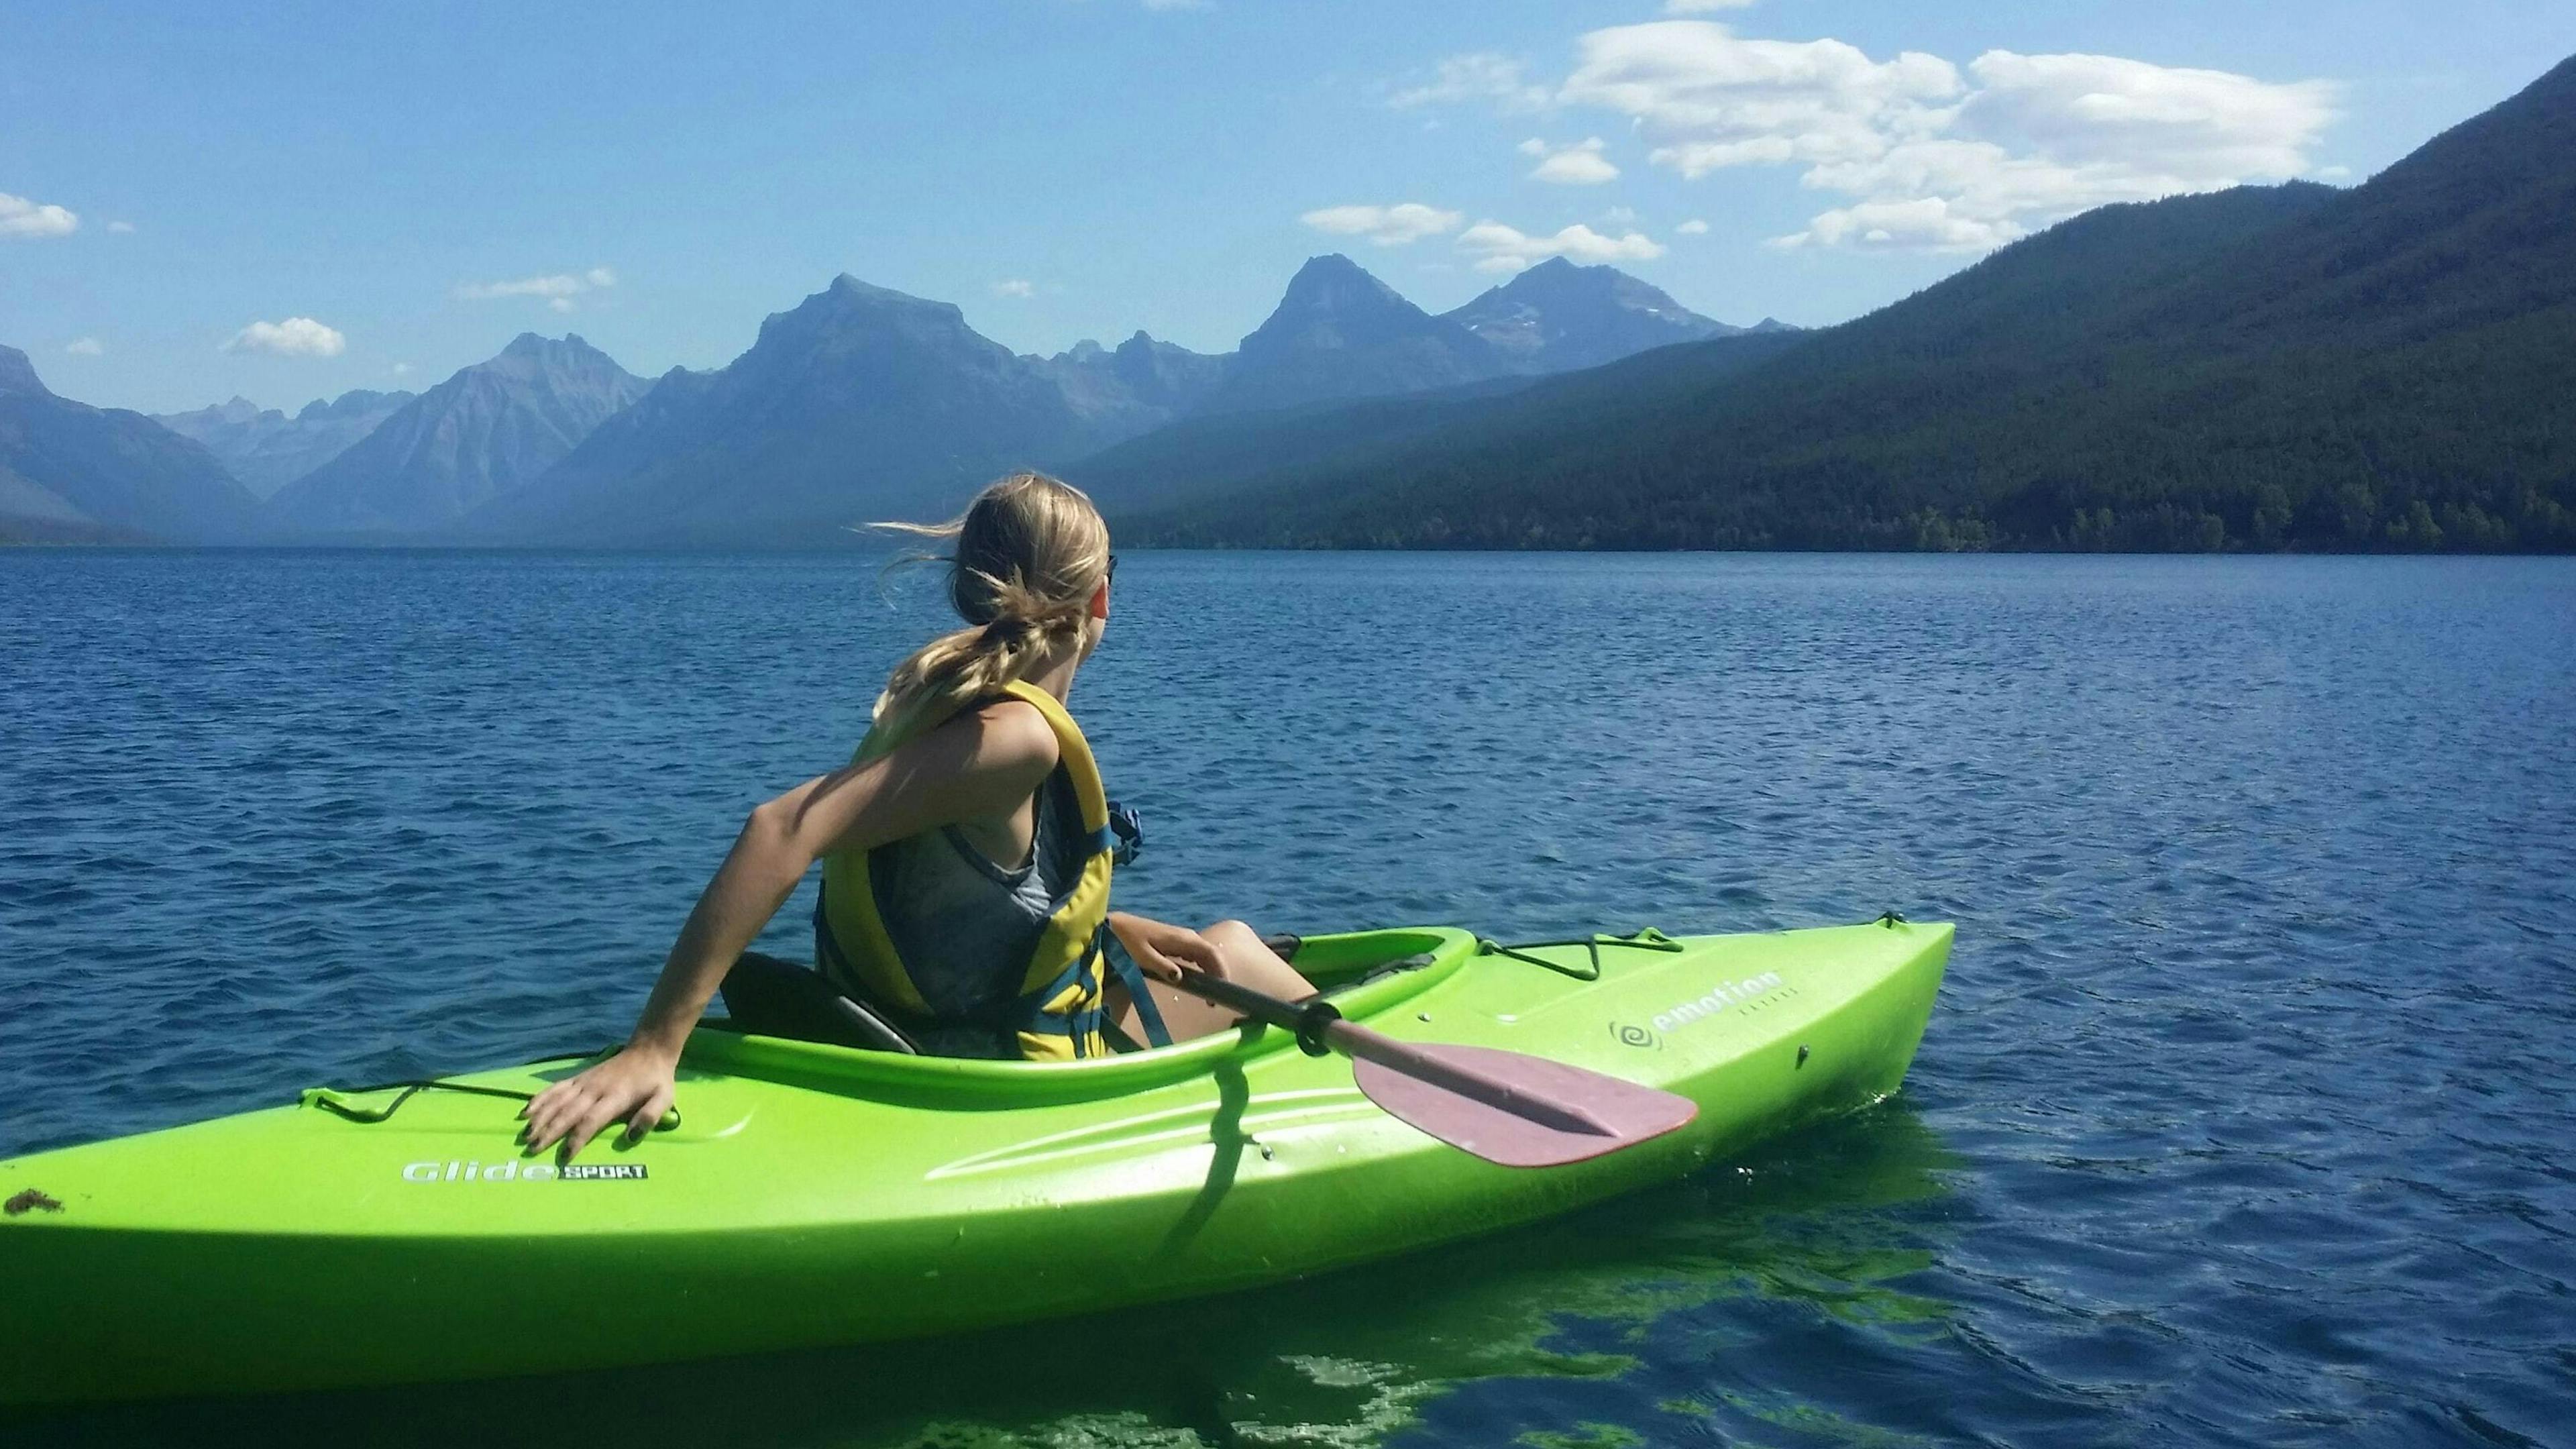 A woman on the water in a green kayak looking towards a vast mountain range.